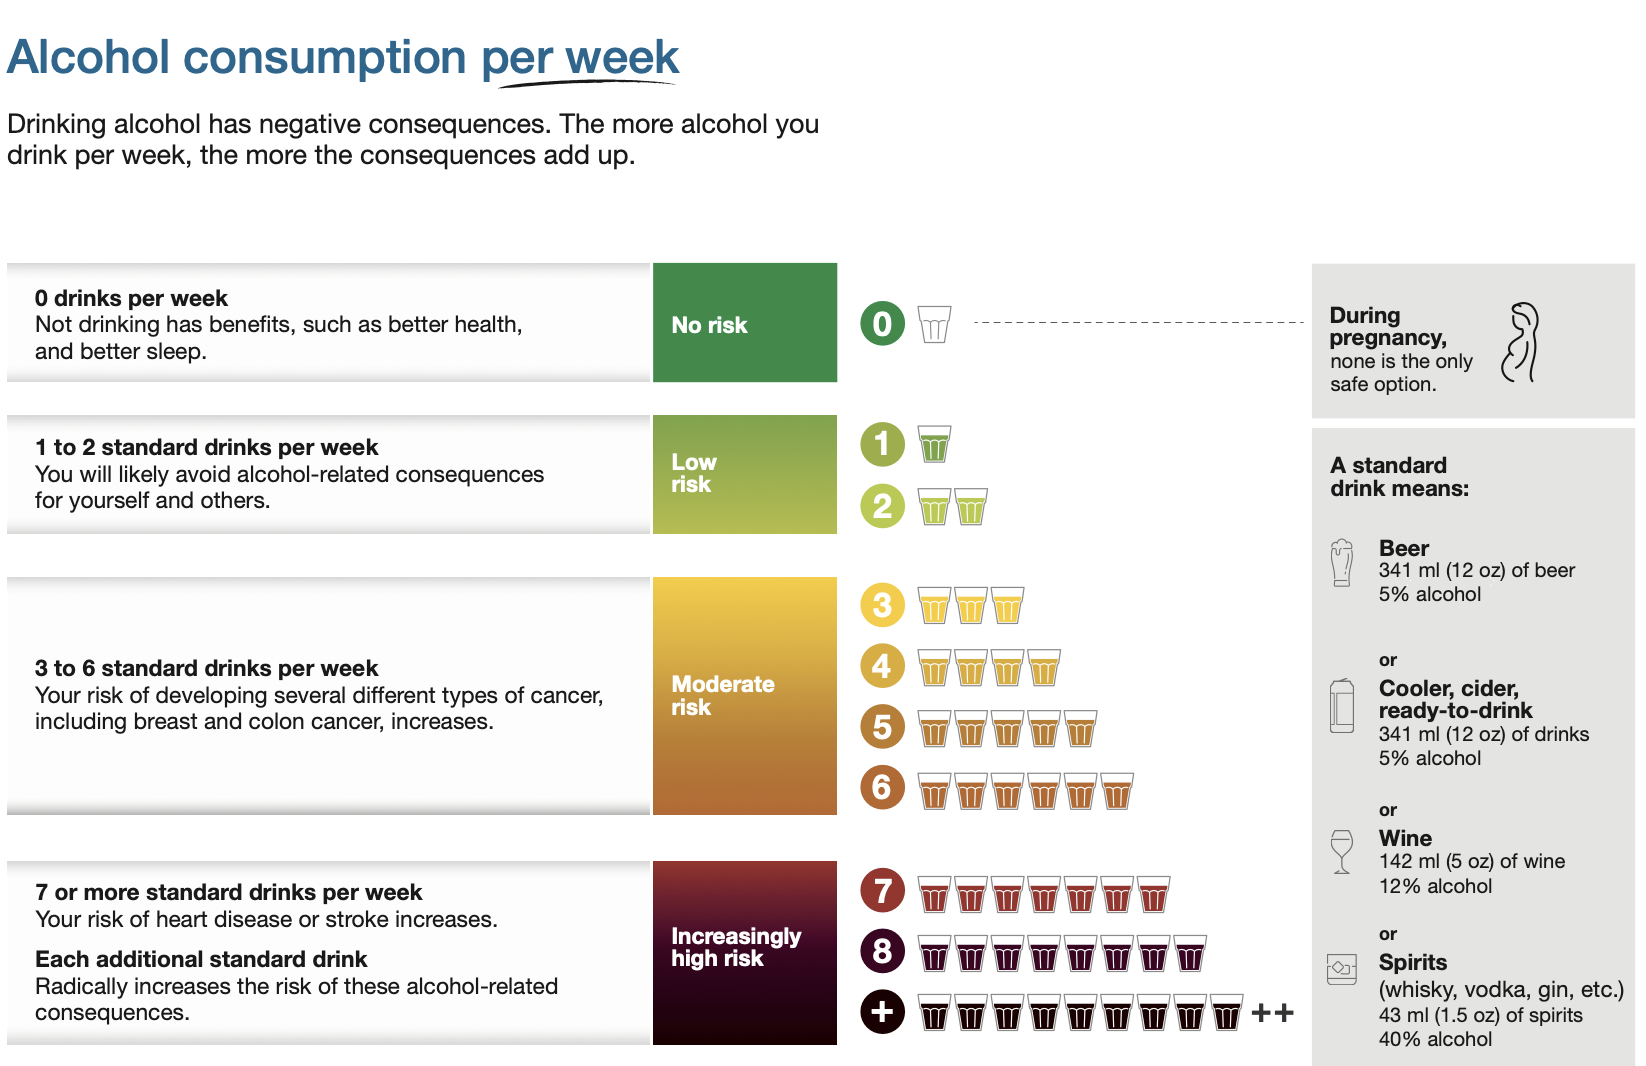 Chart of negative consequences of alcohol consumption based on weekly consumption